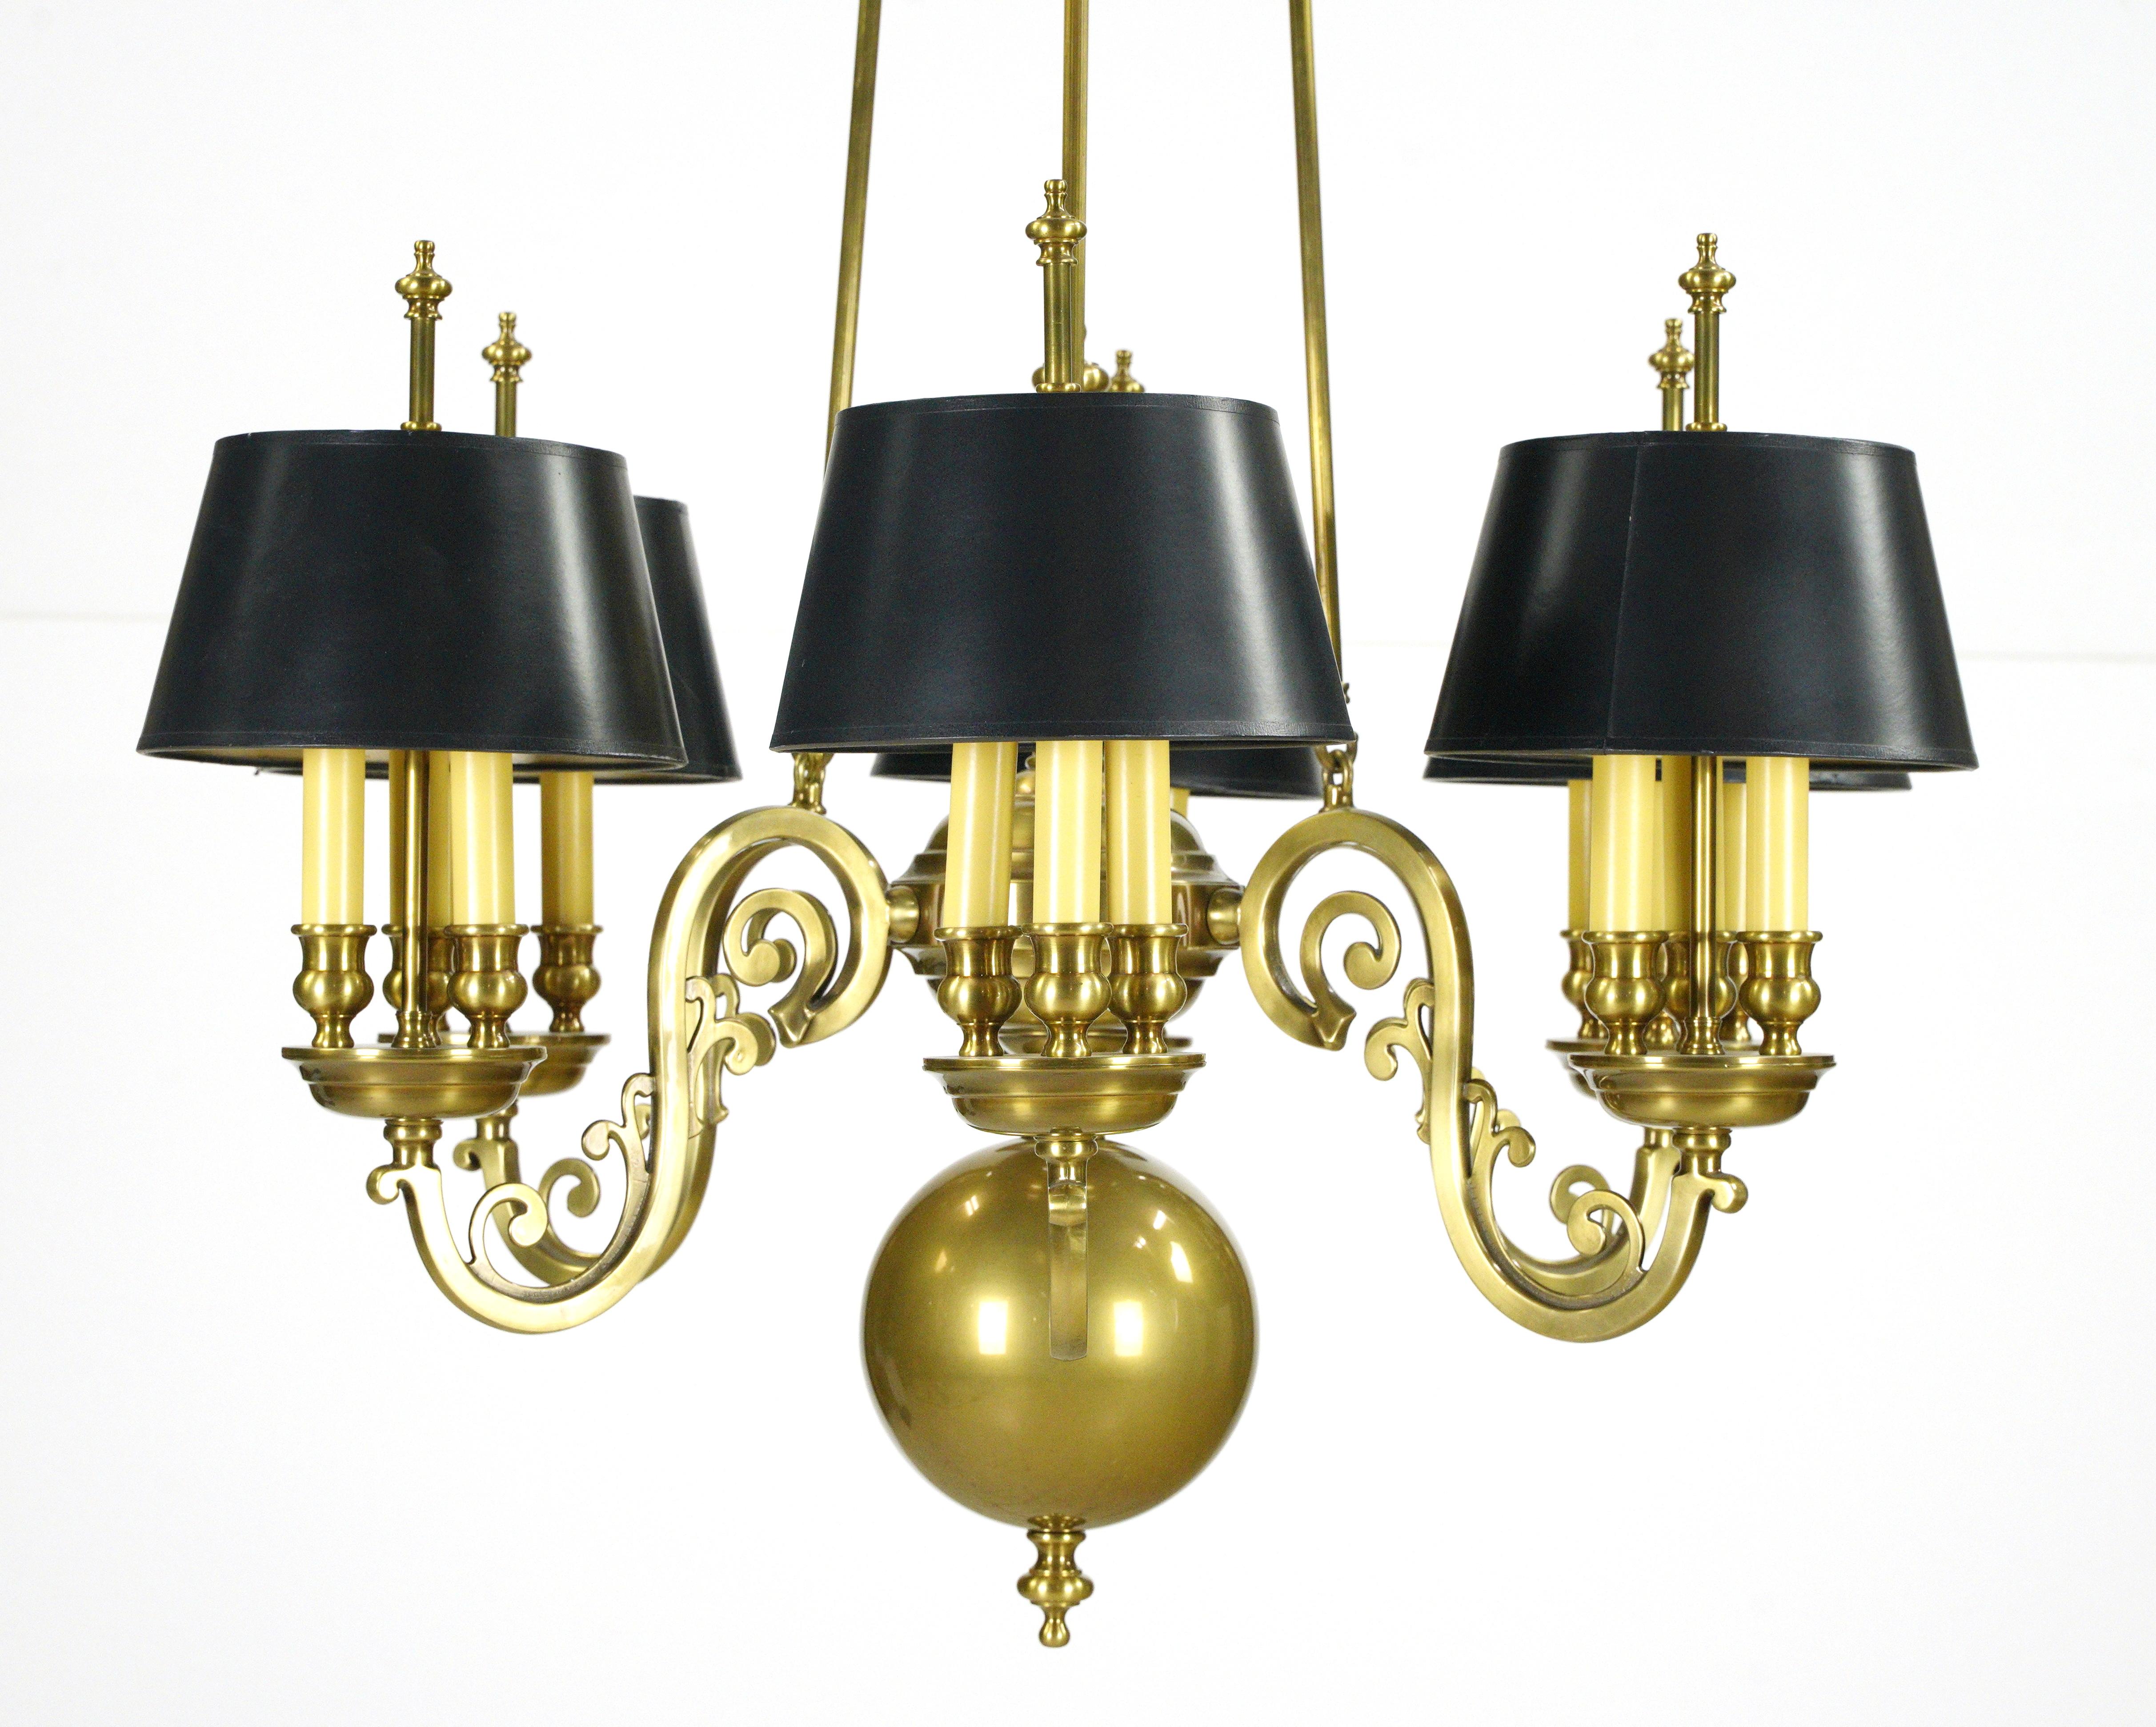 Williamsburg style chandelier with a brass patina frame and six arms featuring black shades positioned on three candle sticks. Good condition with minor surface wear on the brass. This light requires 18 candelabra light bulbs. Cleaned and restored.